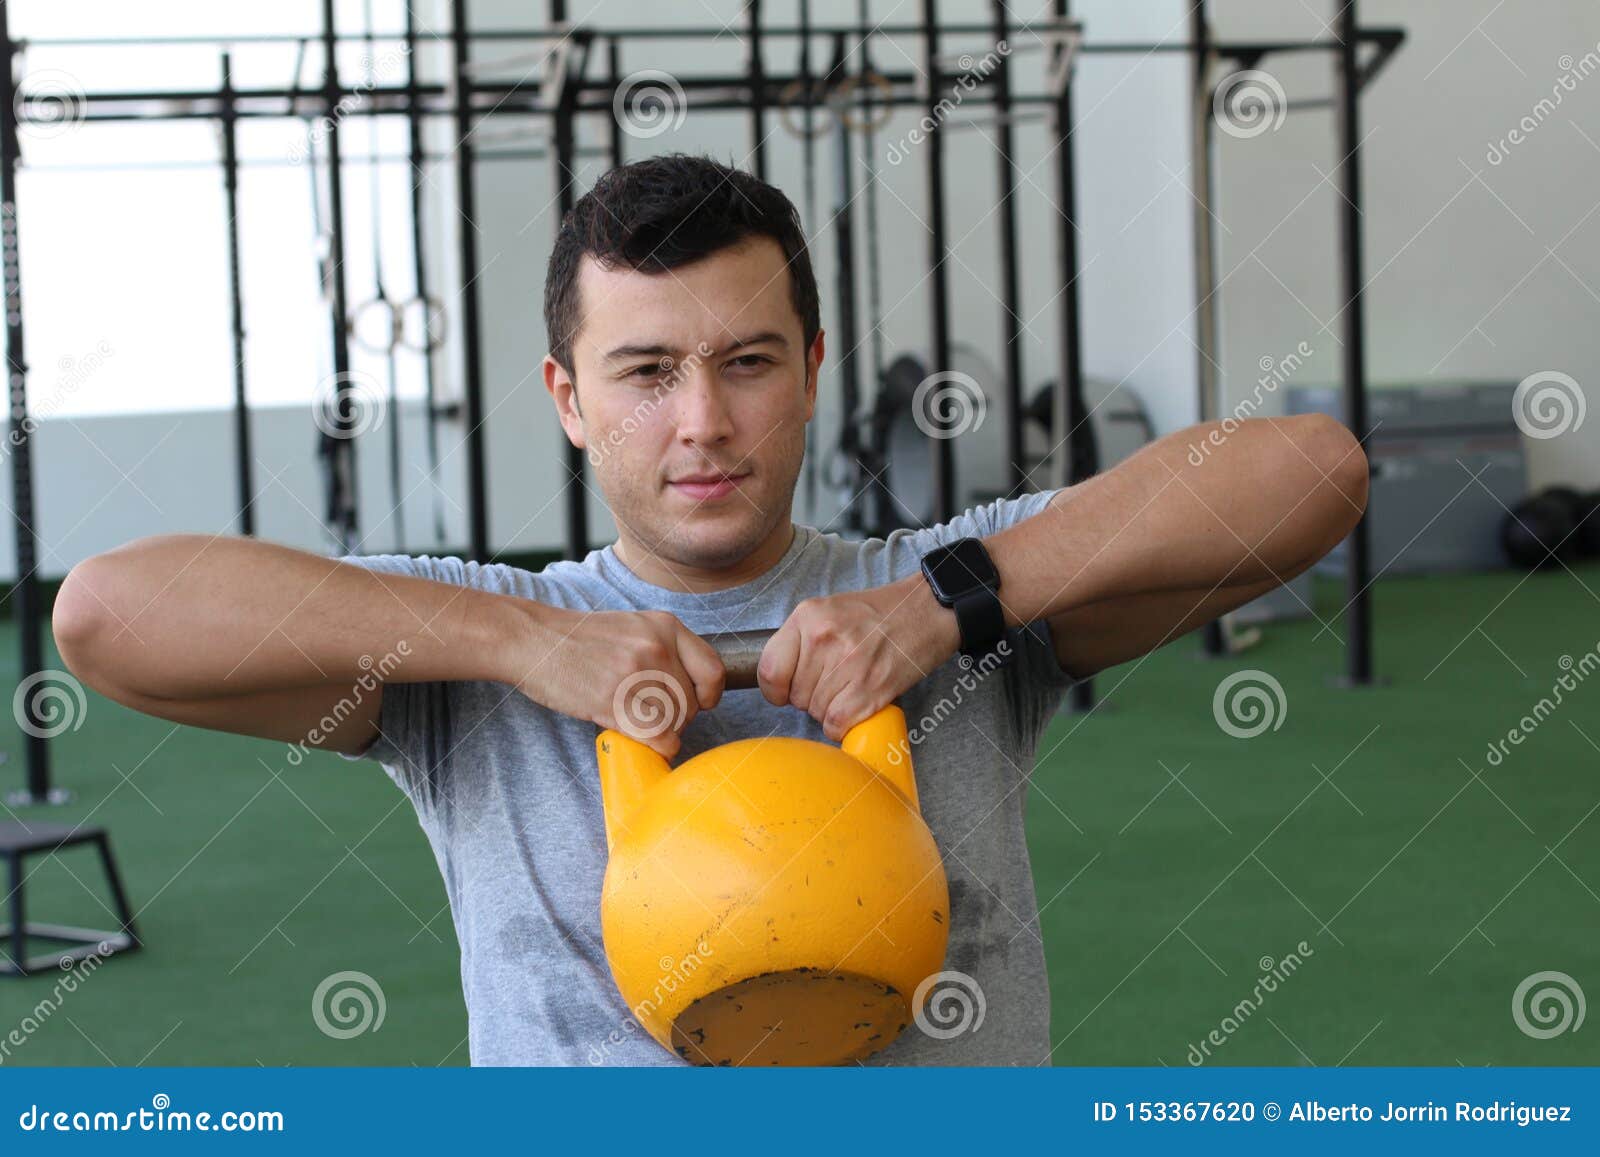 Real Looking Man during Work Out Stock Photo - Image of body, lifting ...